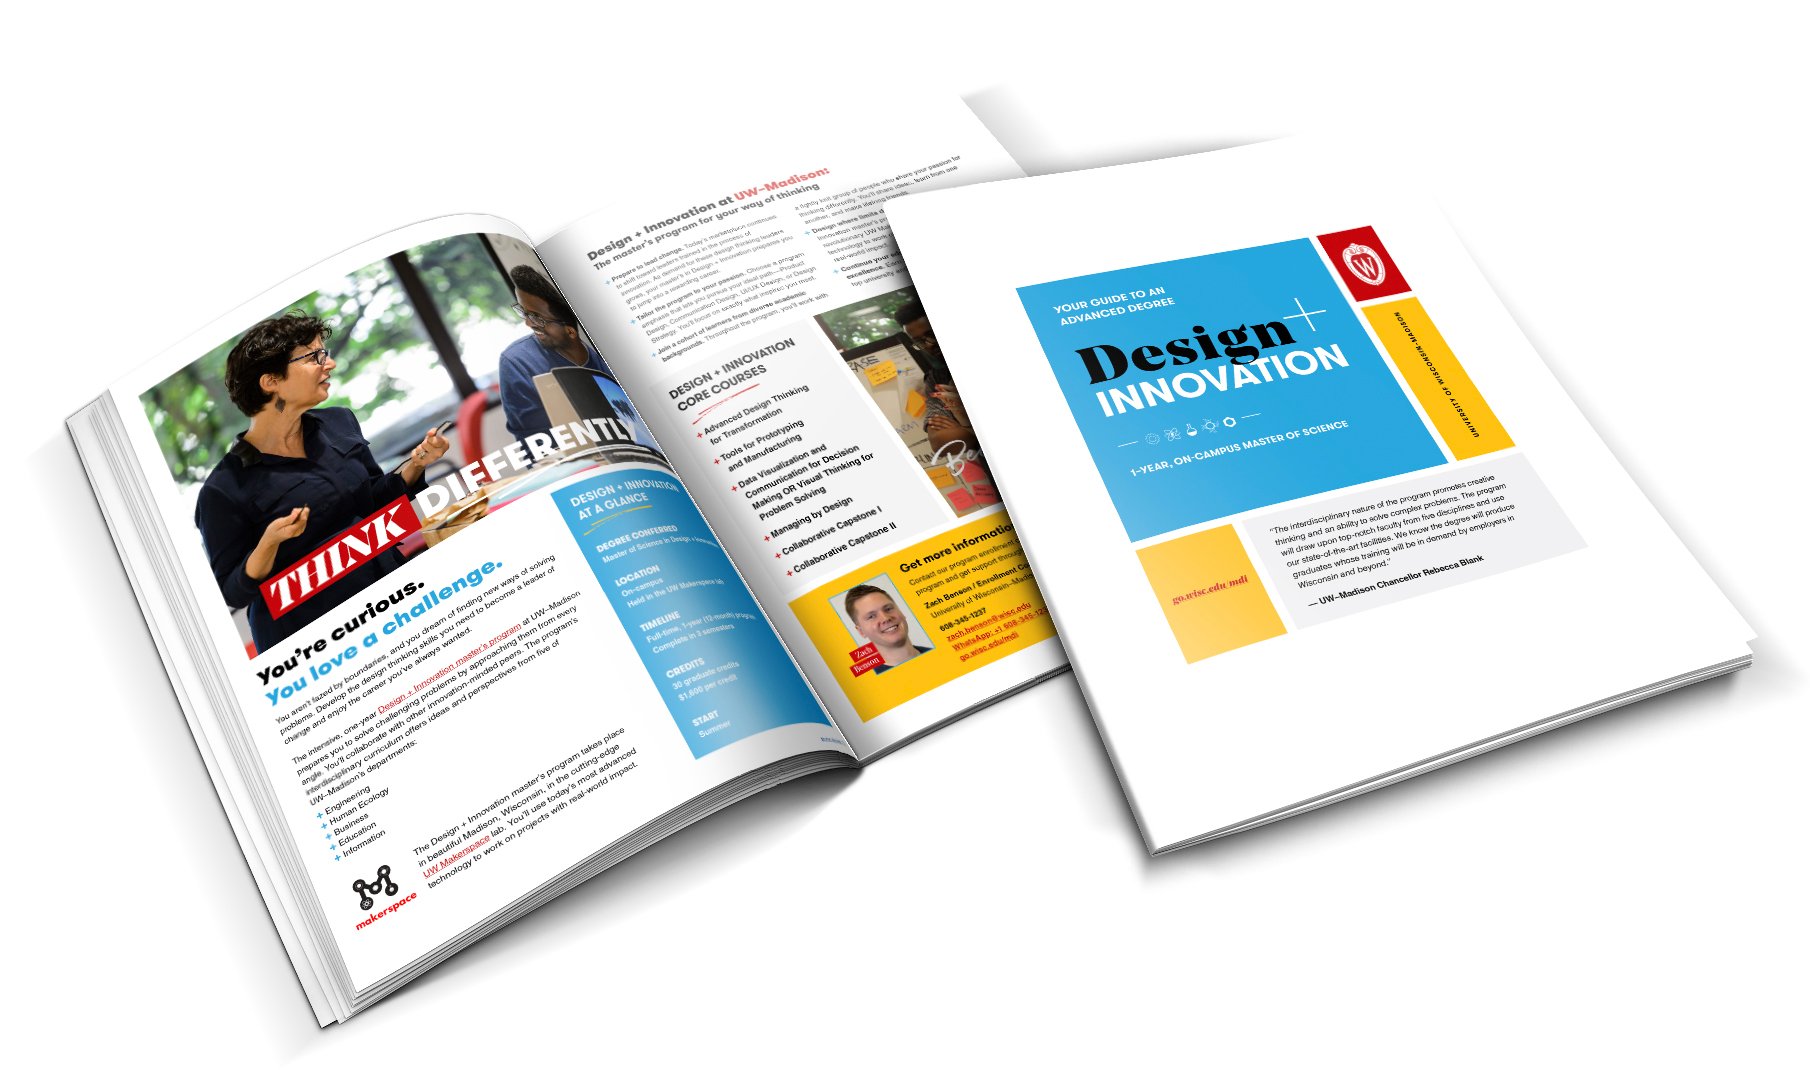 Program guide created by Vendi Advertising for the University of Wisconsin¬–Madison Design and Innovation program